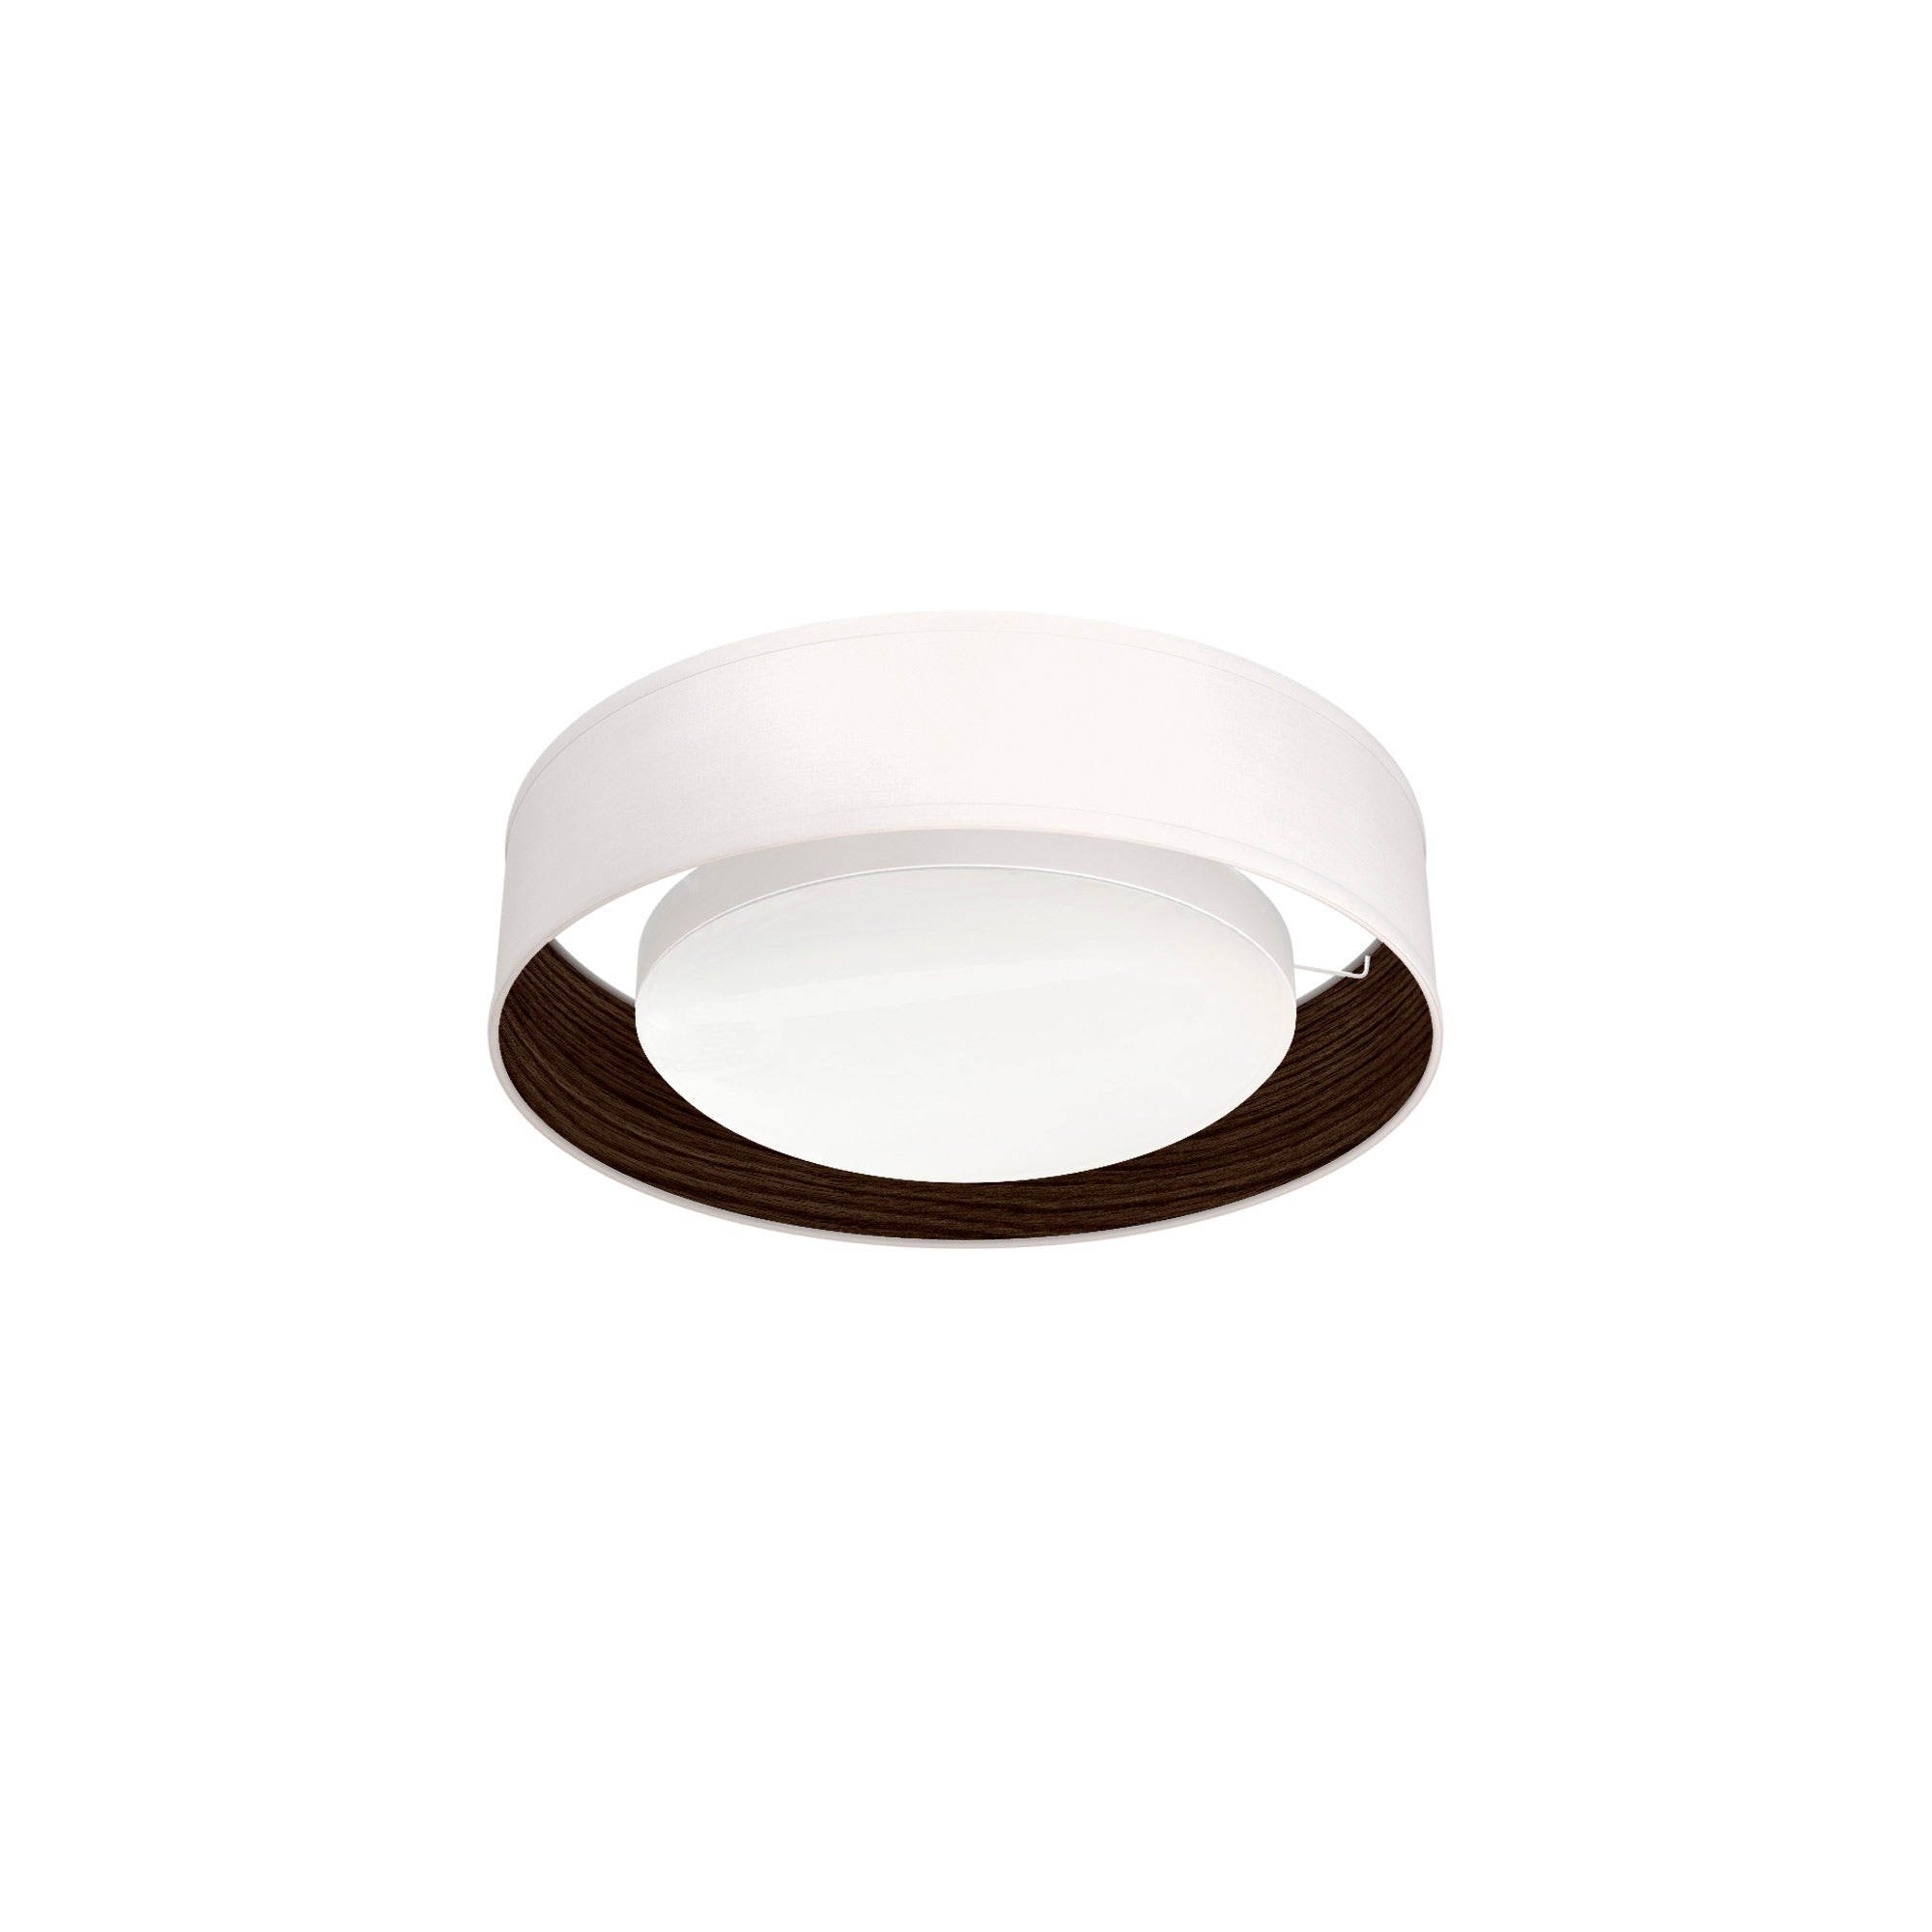 The Vinny Flush Mount from Seascape Fixtures with a photo veneer shade in chocolate color.